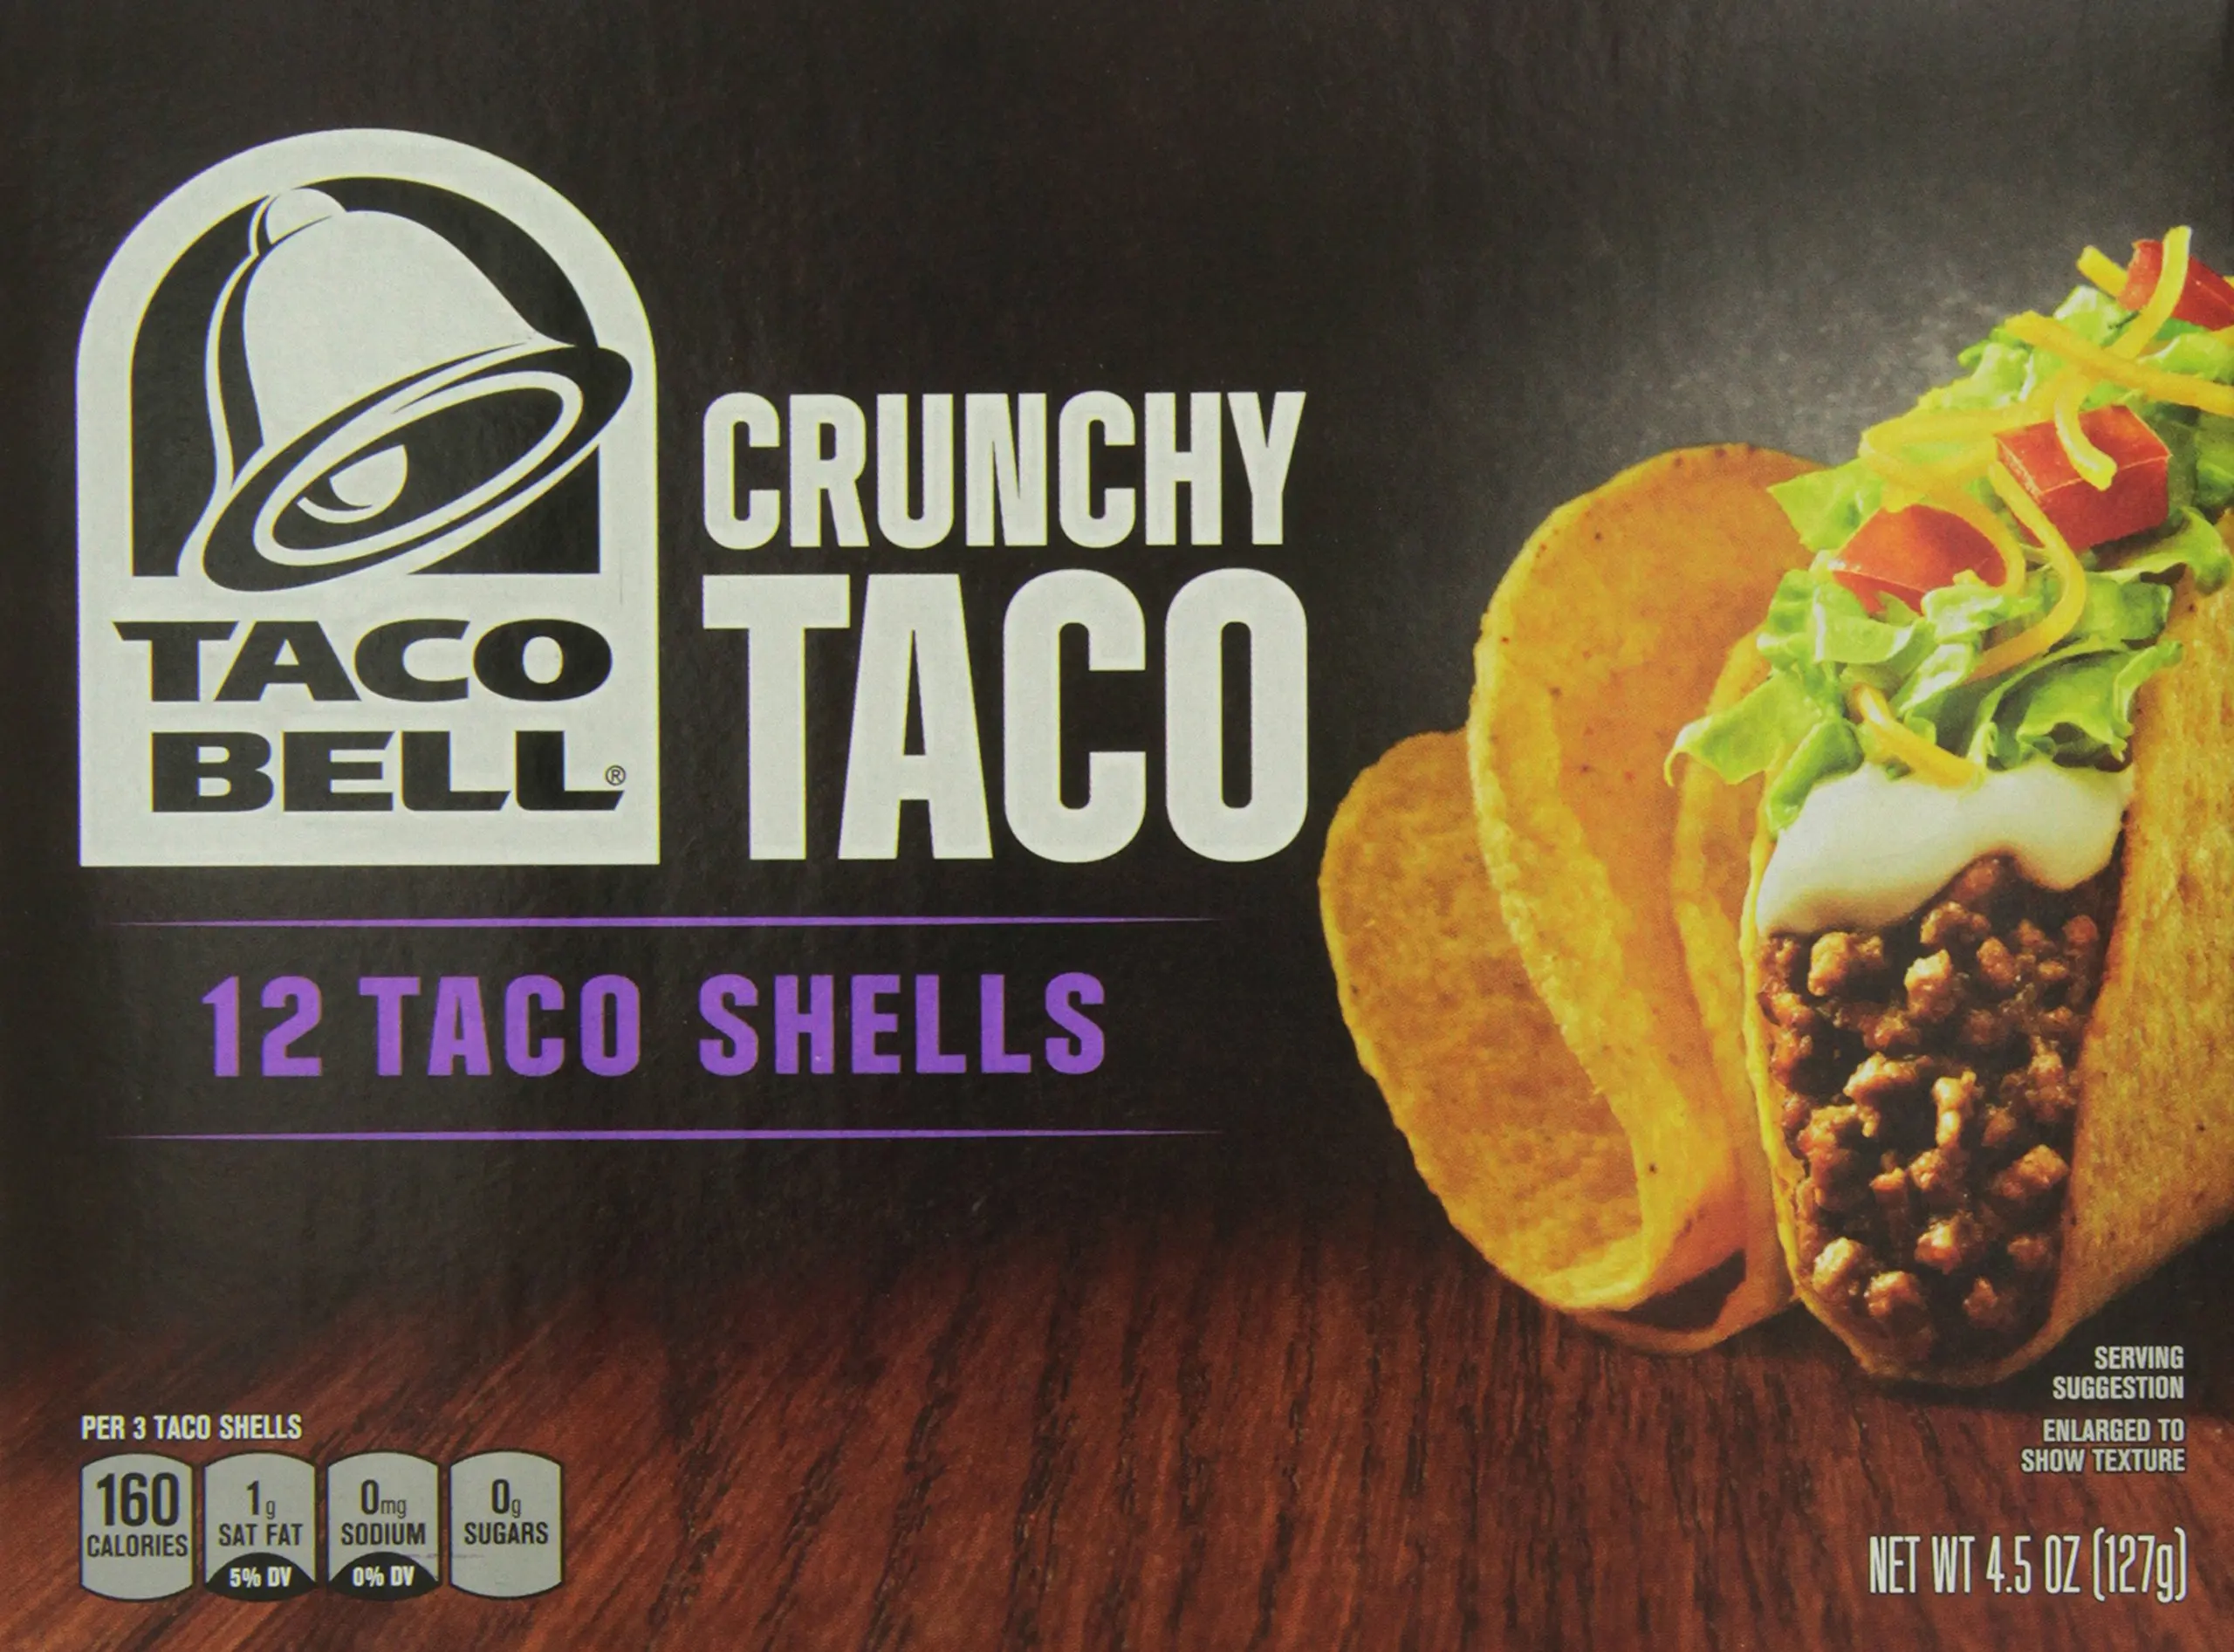 17.76. Taco Bell 12 Crunchy Taco Shells, 4.5 Ounce (Pack of 12). 